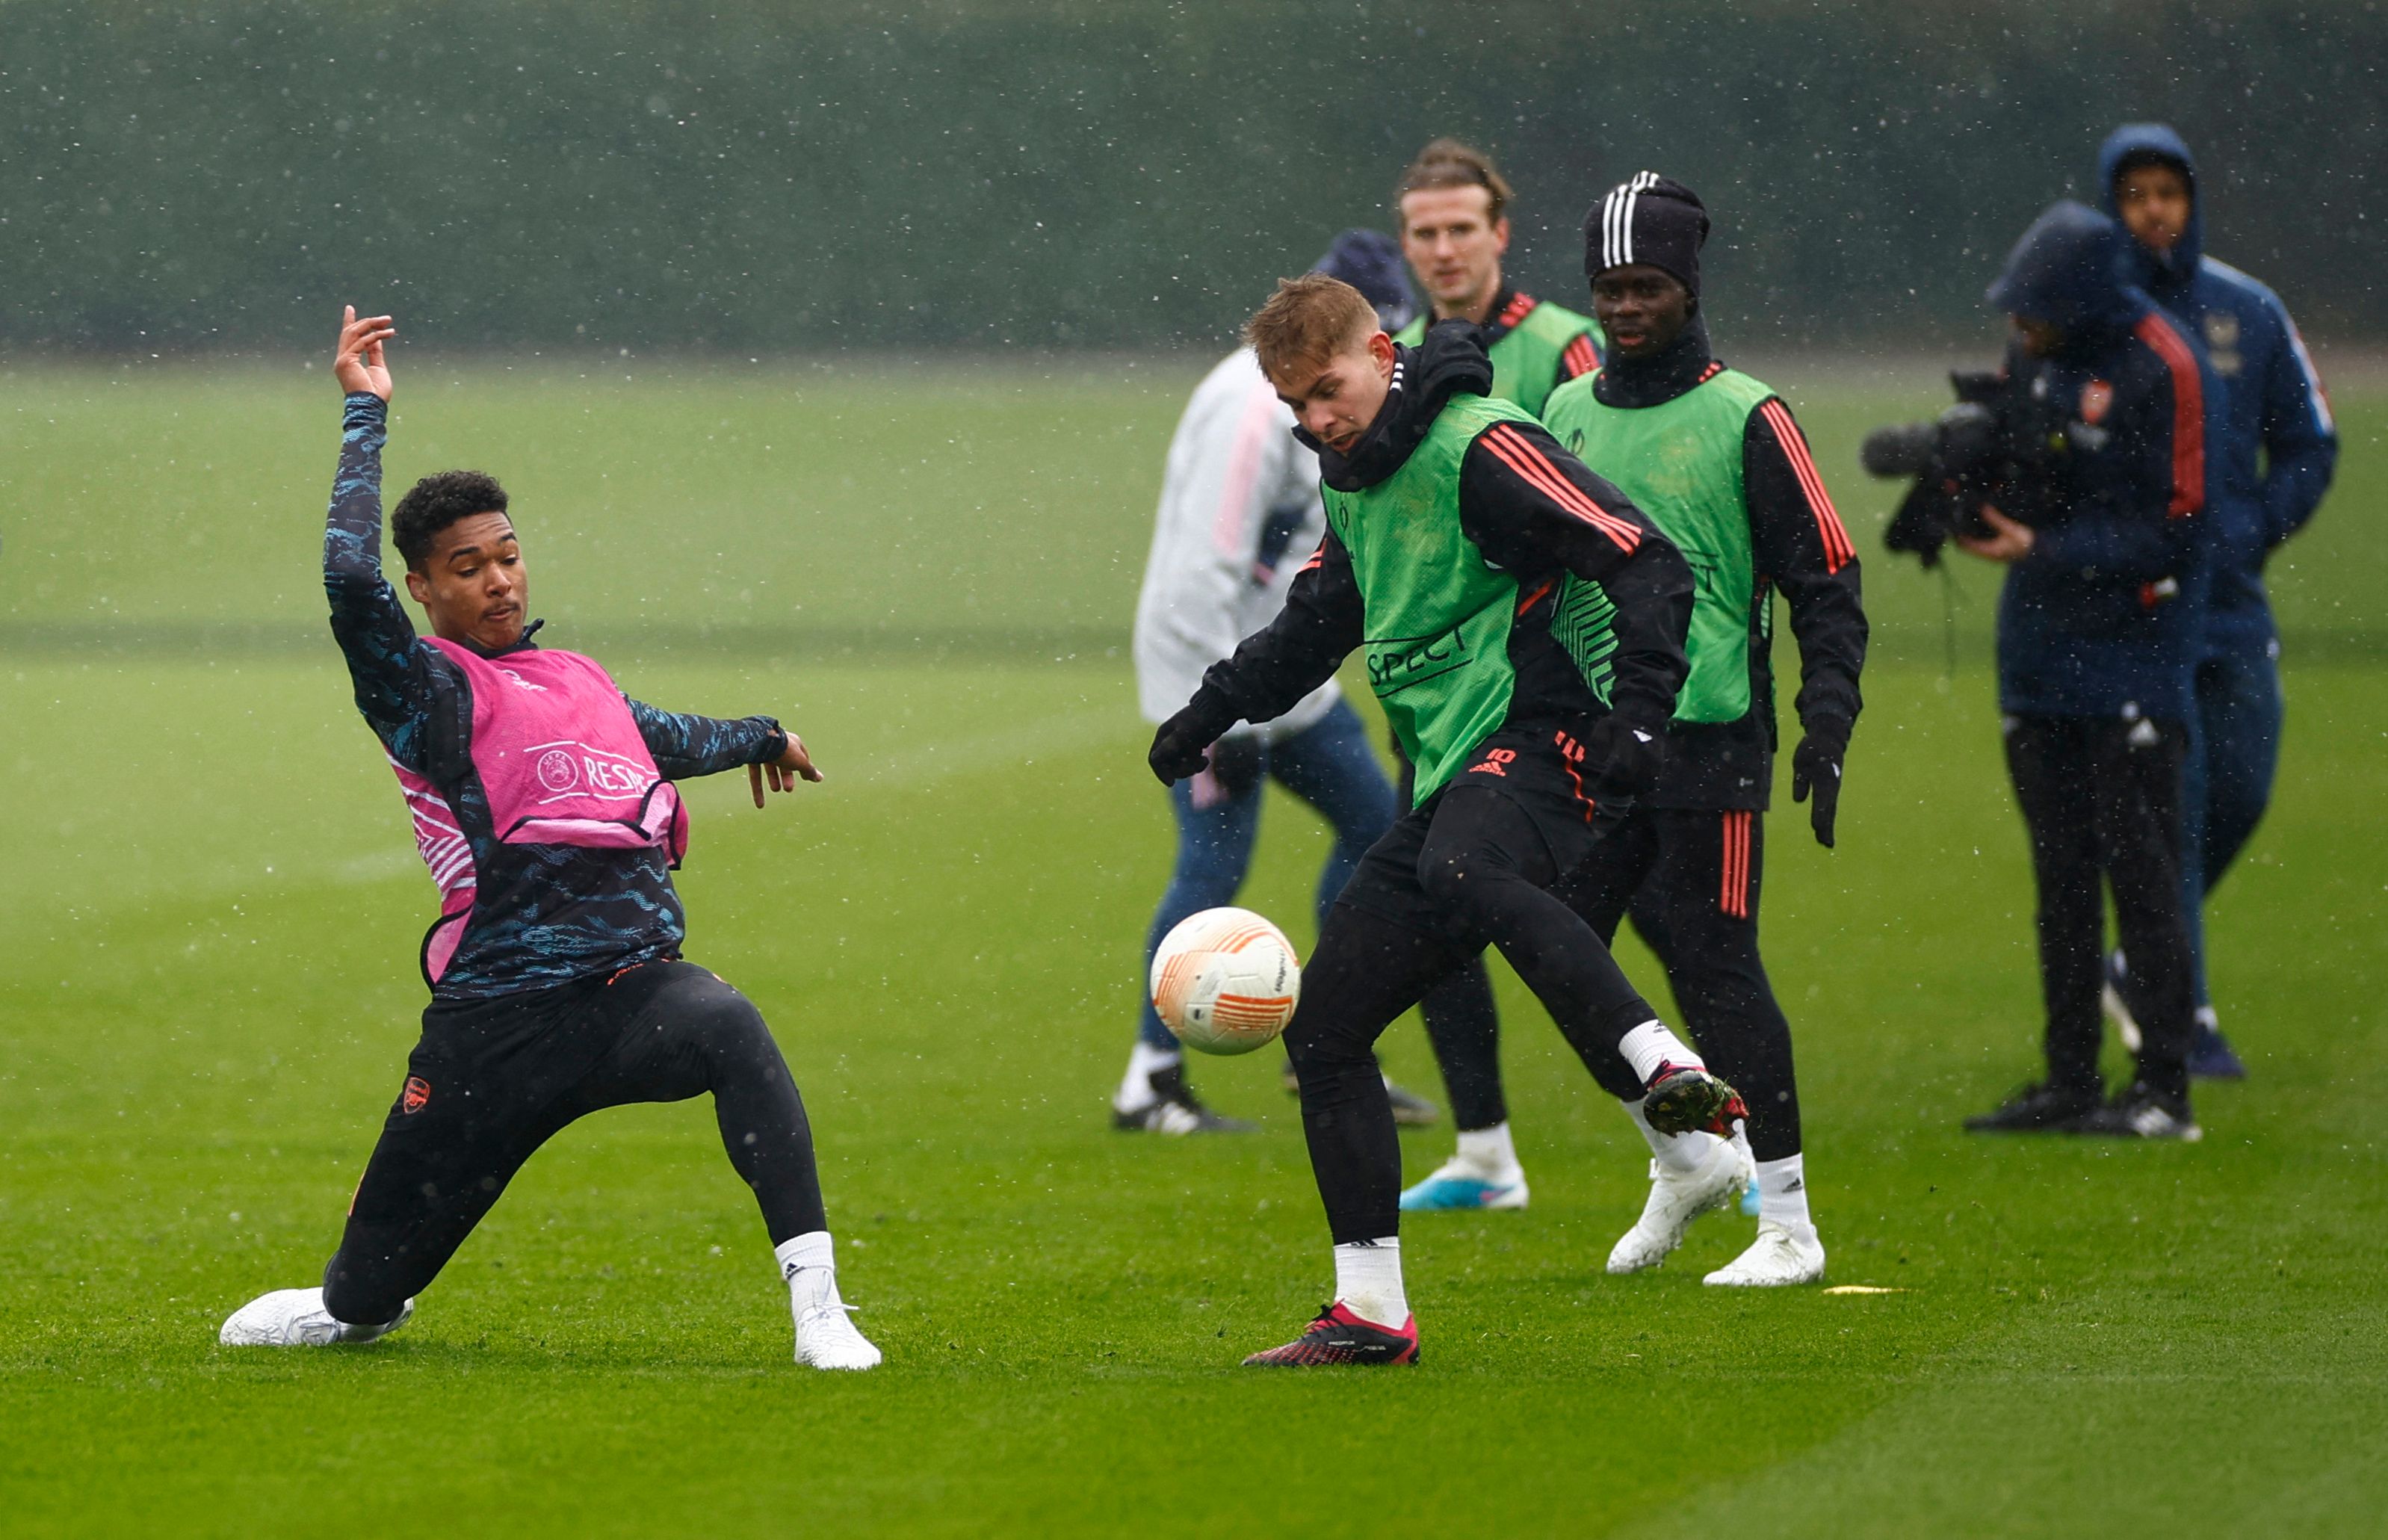 Arsenal's Emile Smith Rowe and Reuell Walters during training